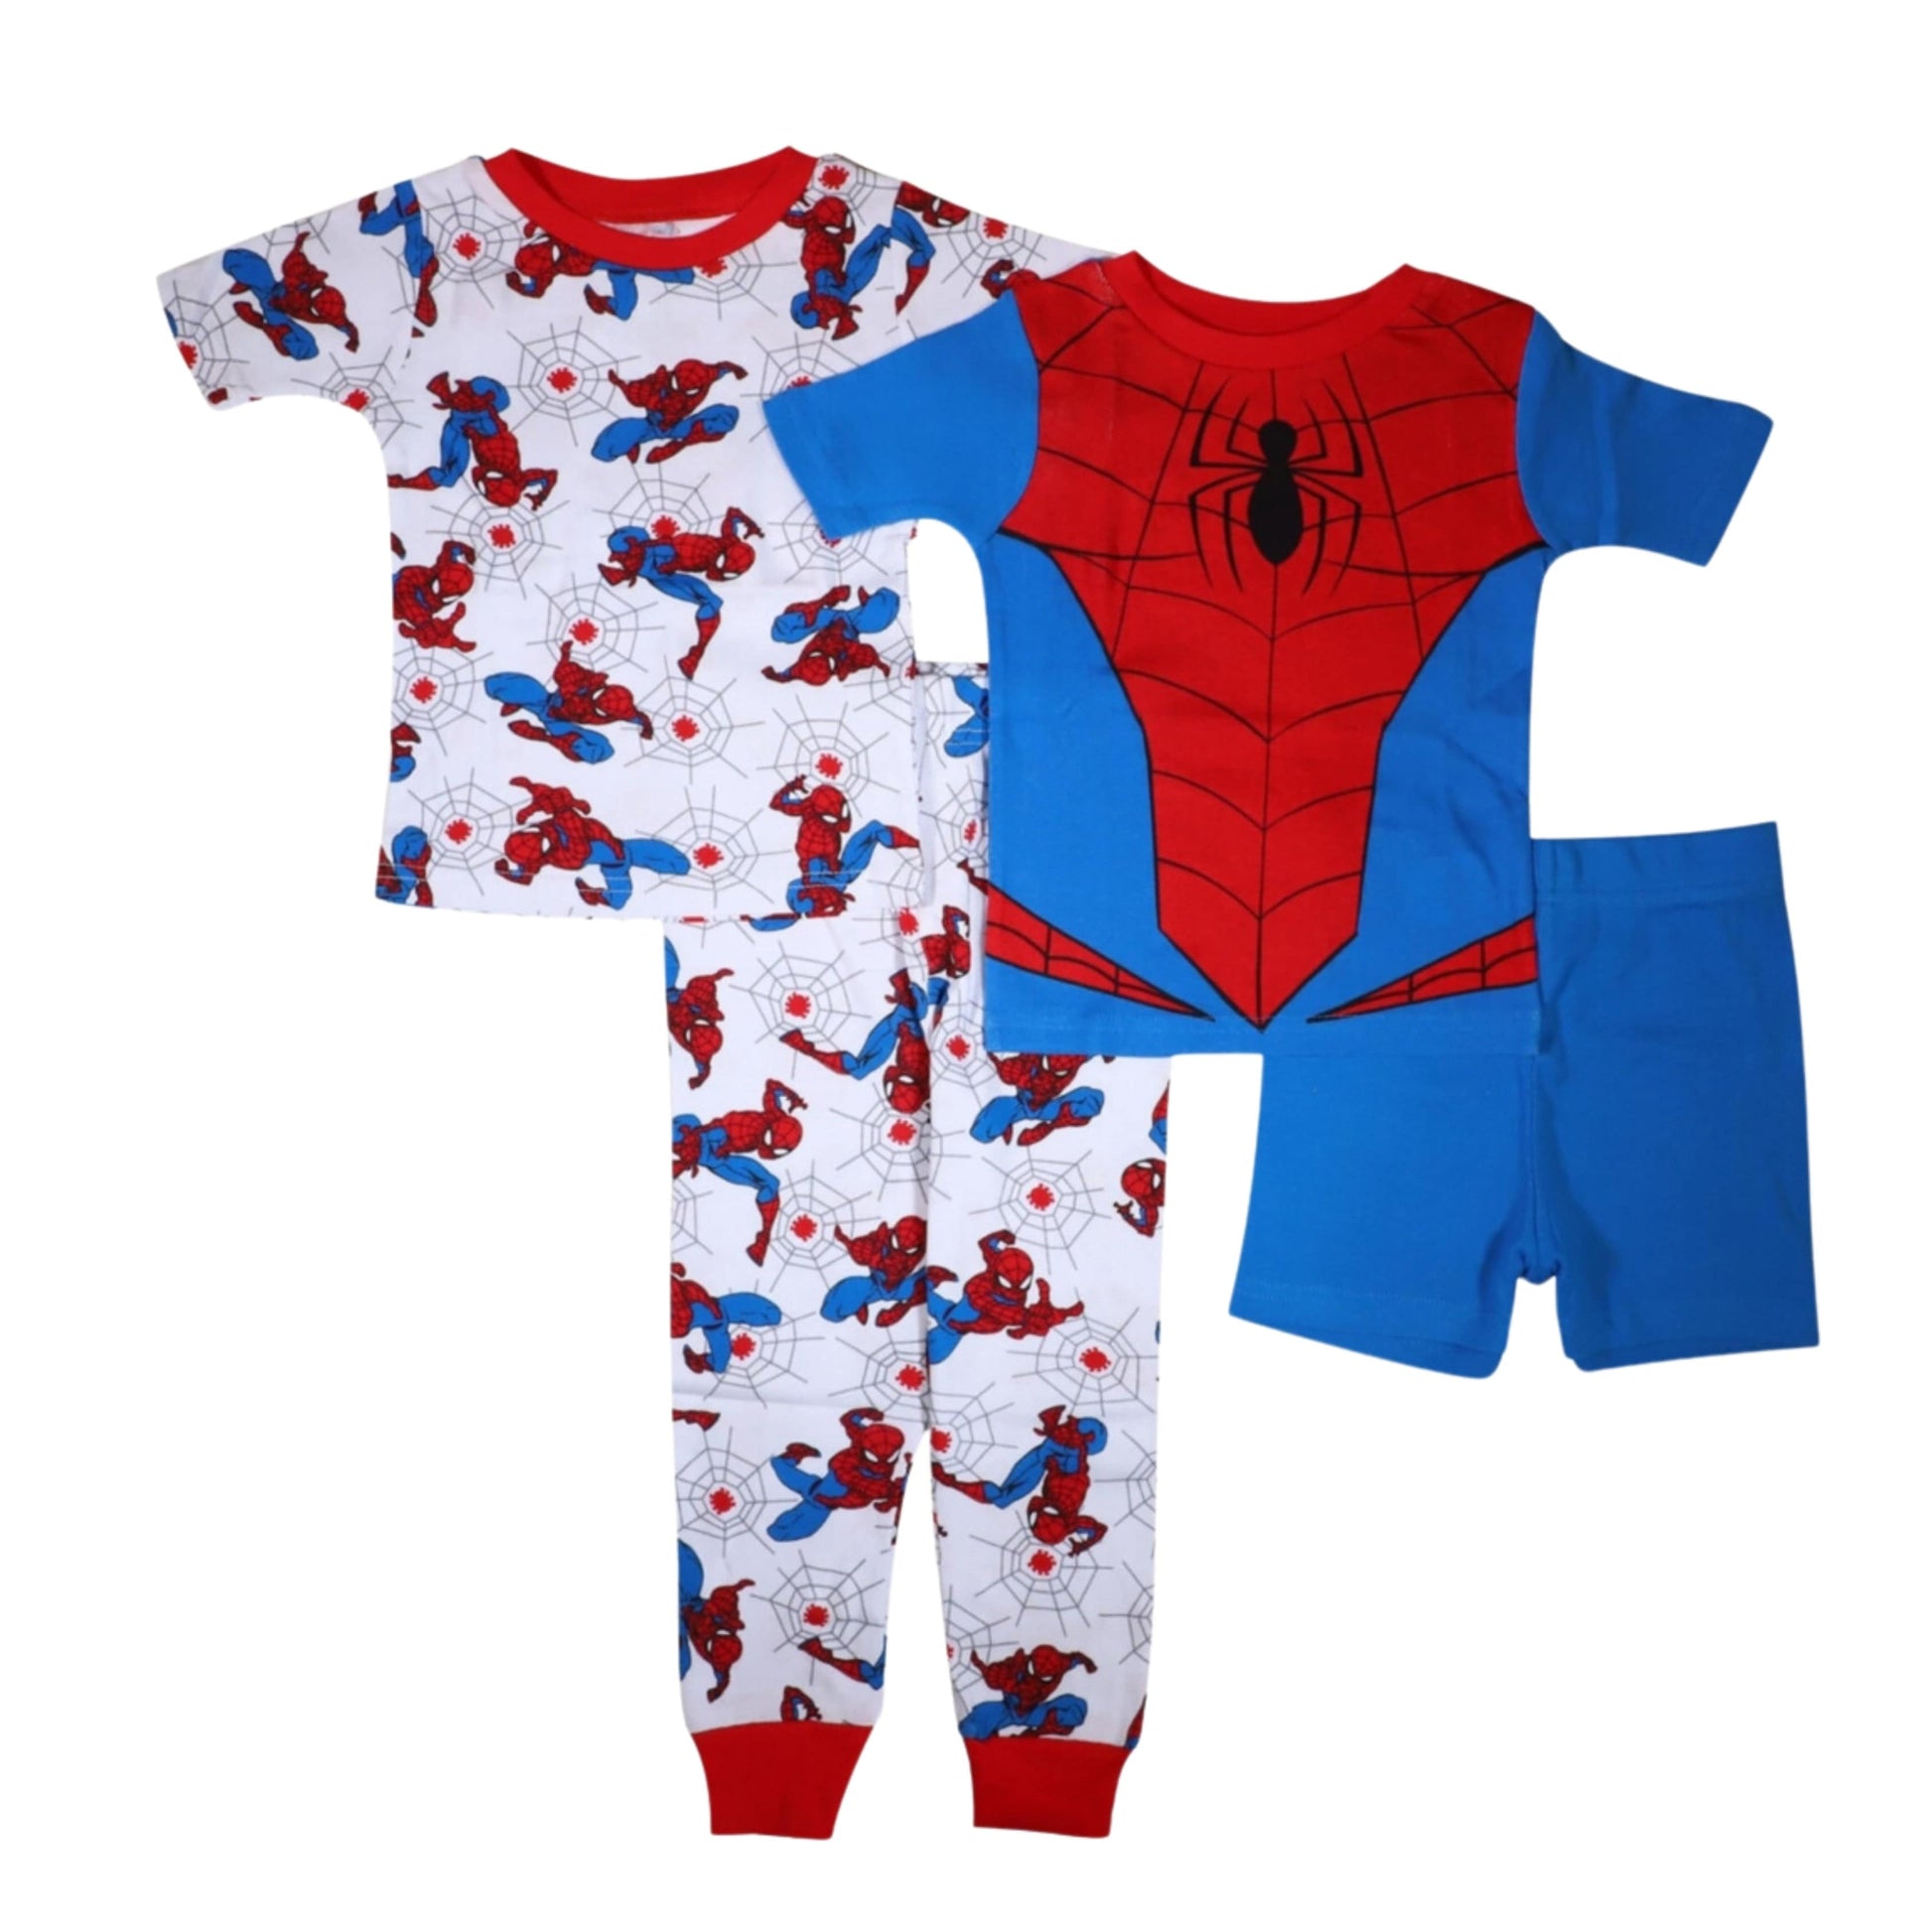 MARVEL Baby Boy 2 Years / Multi-Color MARVEL - BABY - Spider-Man and Friends Toddler Pajamas, 4 Piece Set